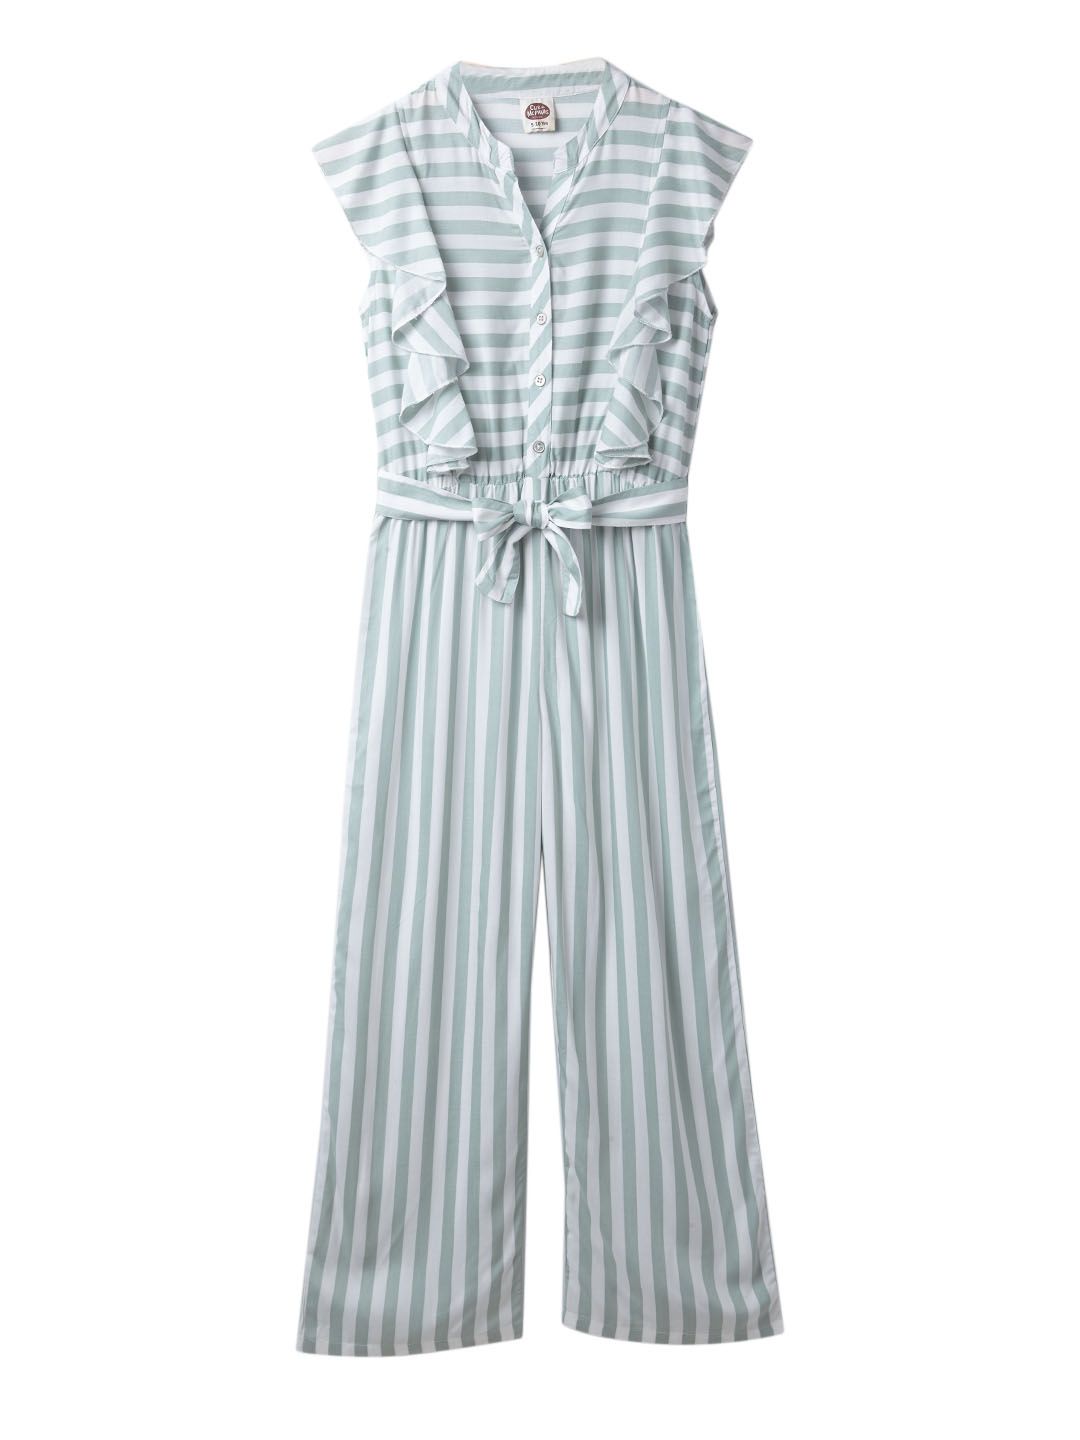 Girls Jumpsuits  Buy Girls Jumpsuits Online Starting at Just 115  Meesho